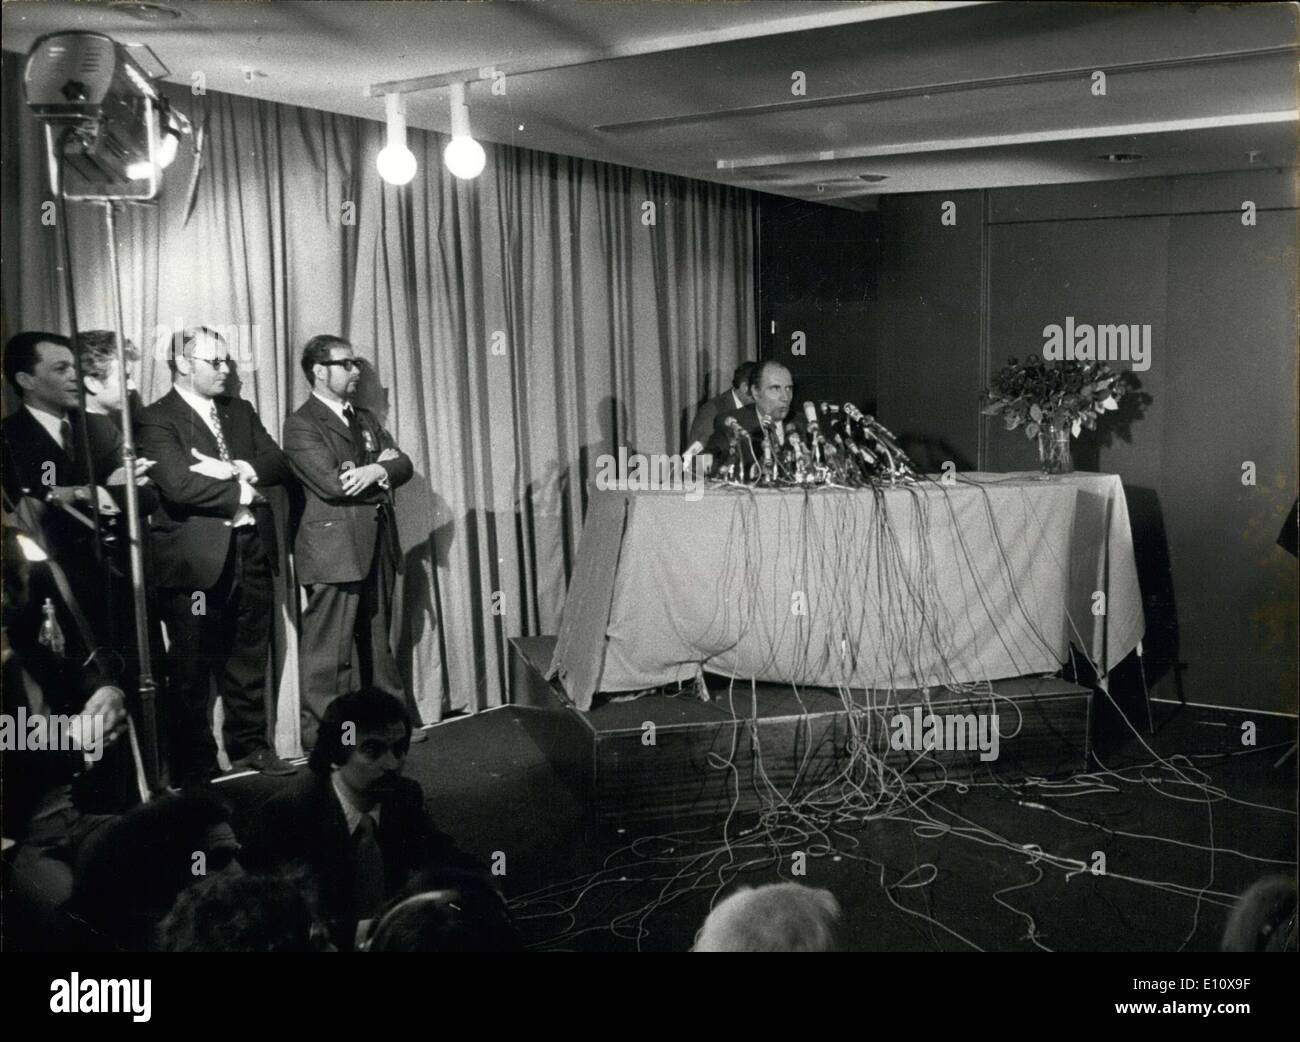 May 06, 1974 - With 43% of the vote, Francois Mitterrand finds himself up against Giscard d'Estaing in the second round of the presidential election. The press conference was held to comment on the results of the first round. Stock Photo